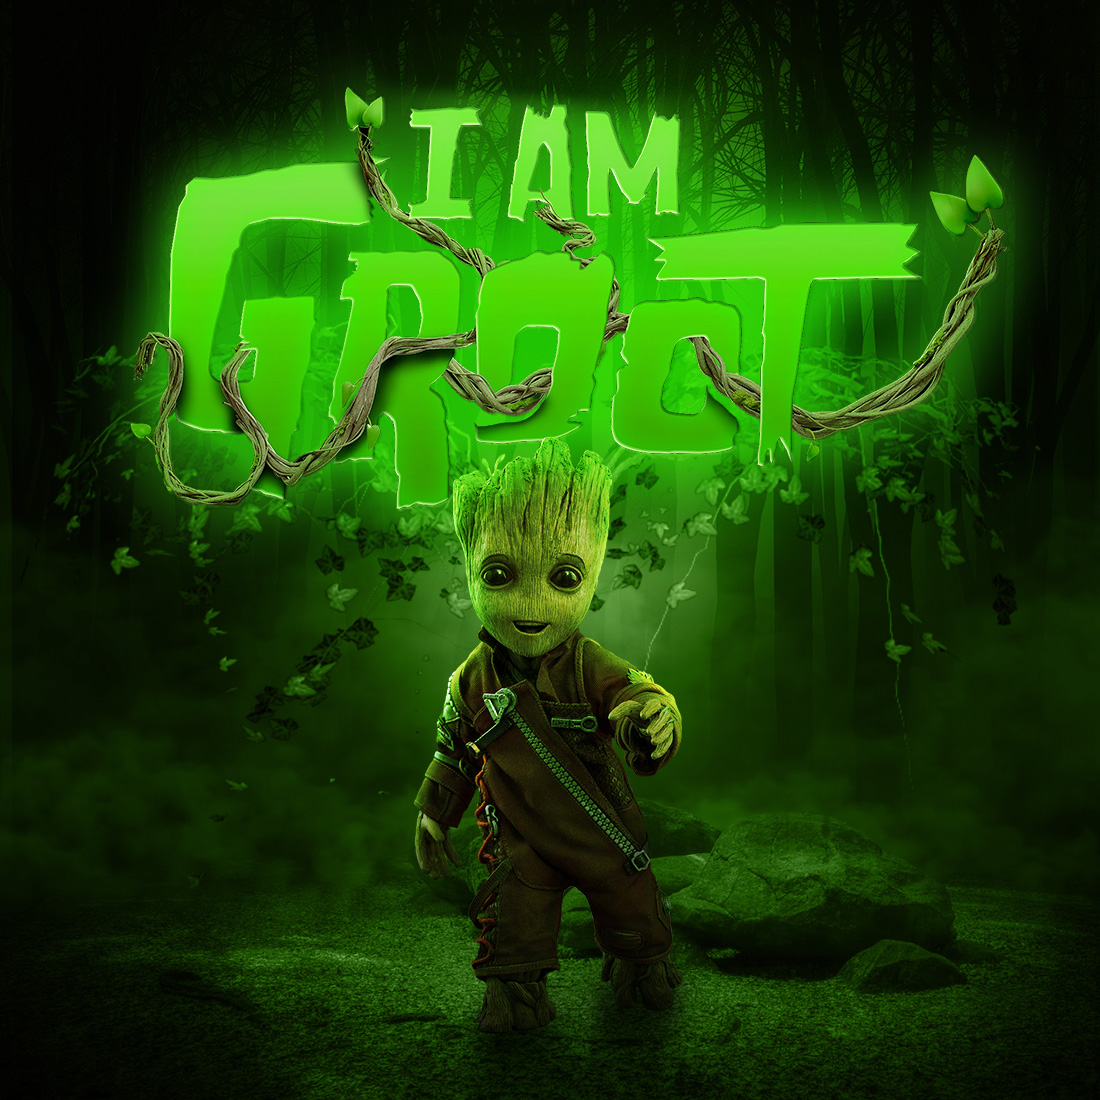 Groot photo manipulation preview image.